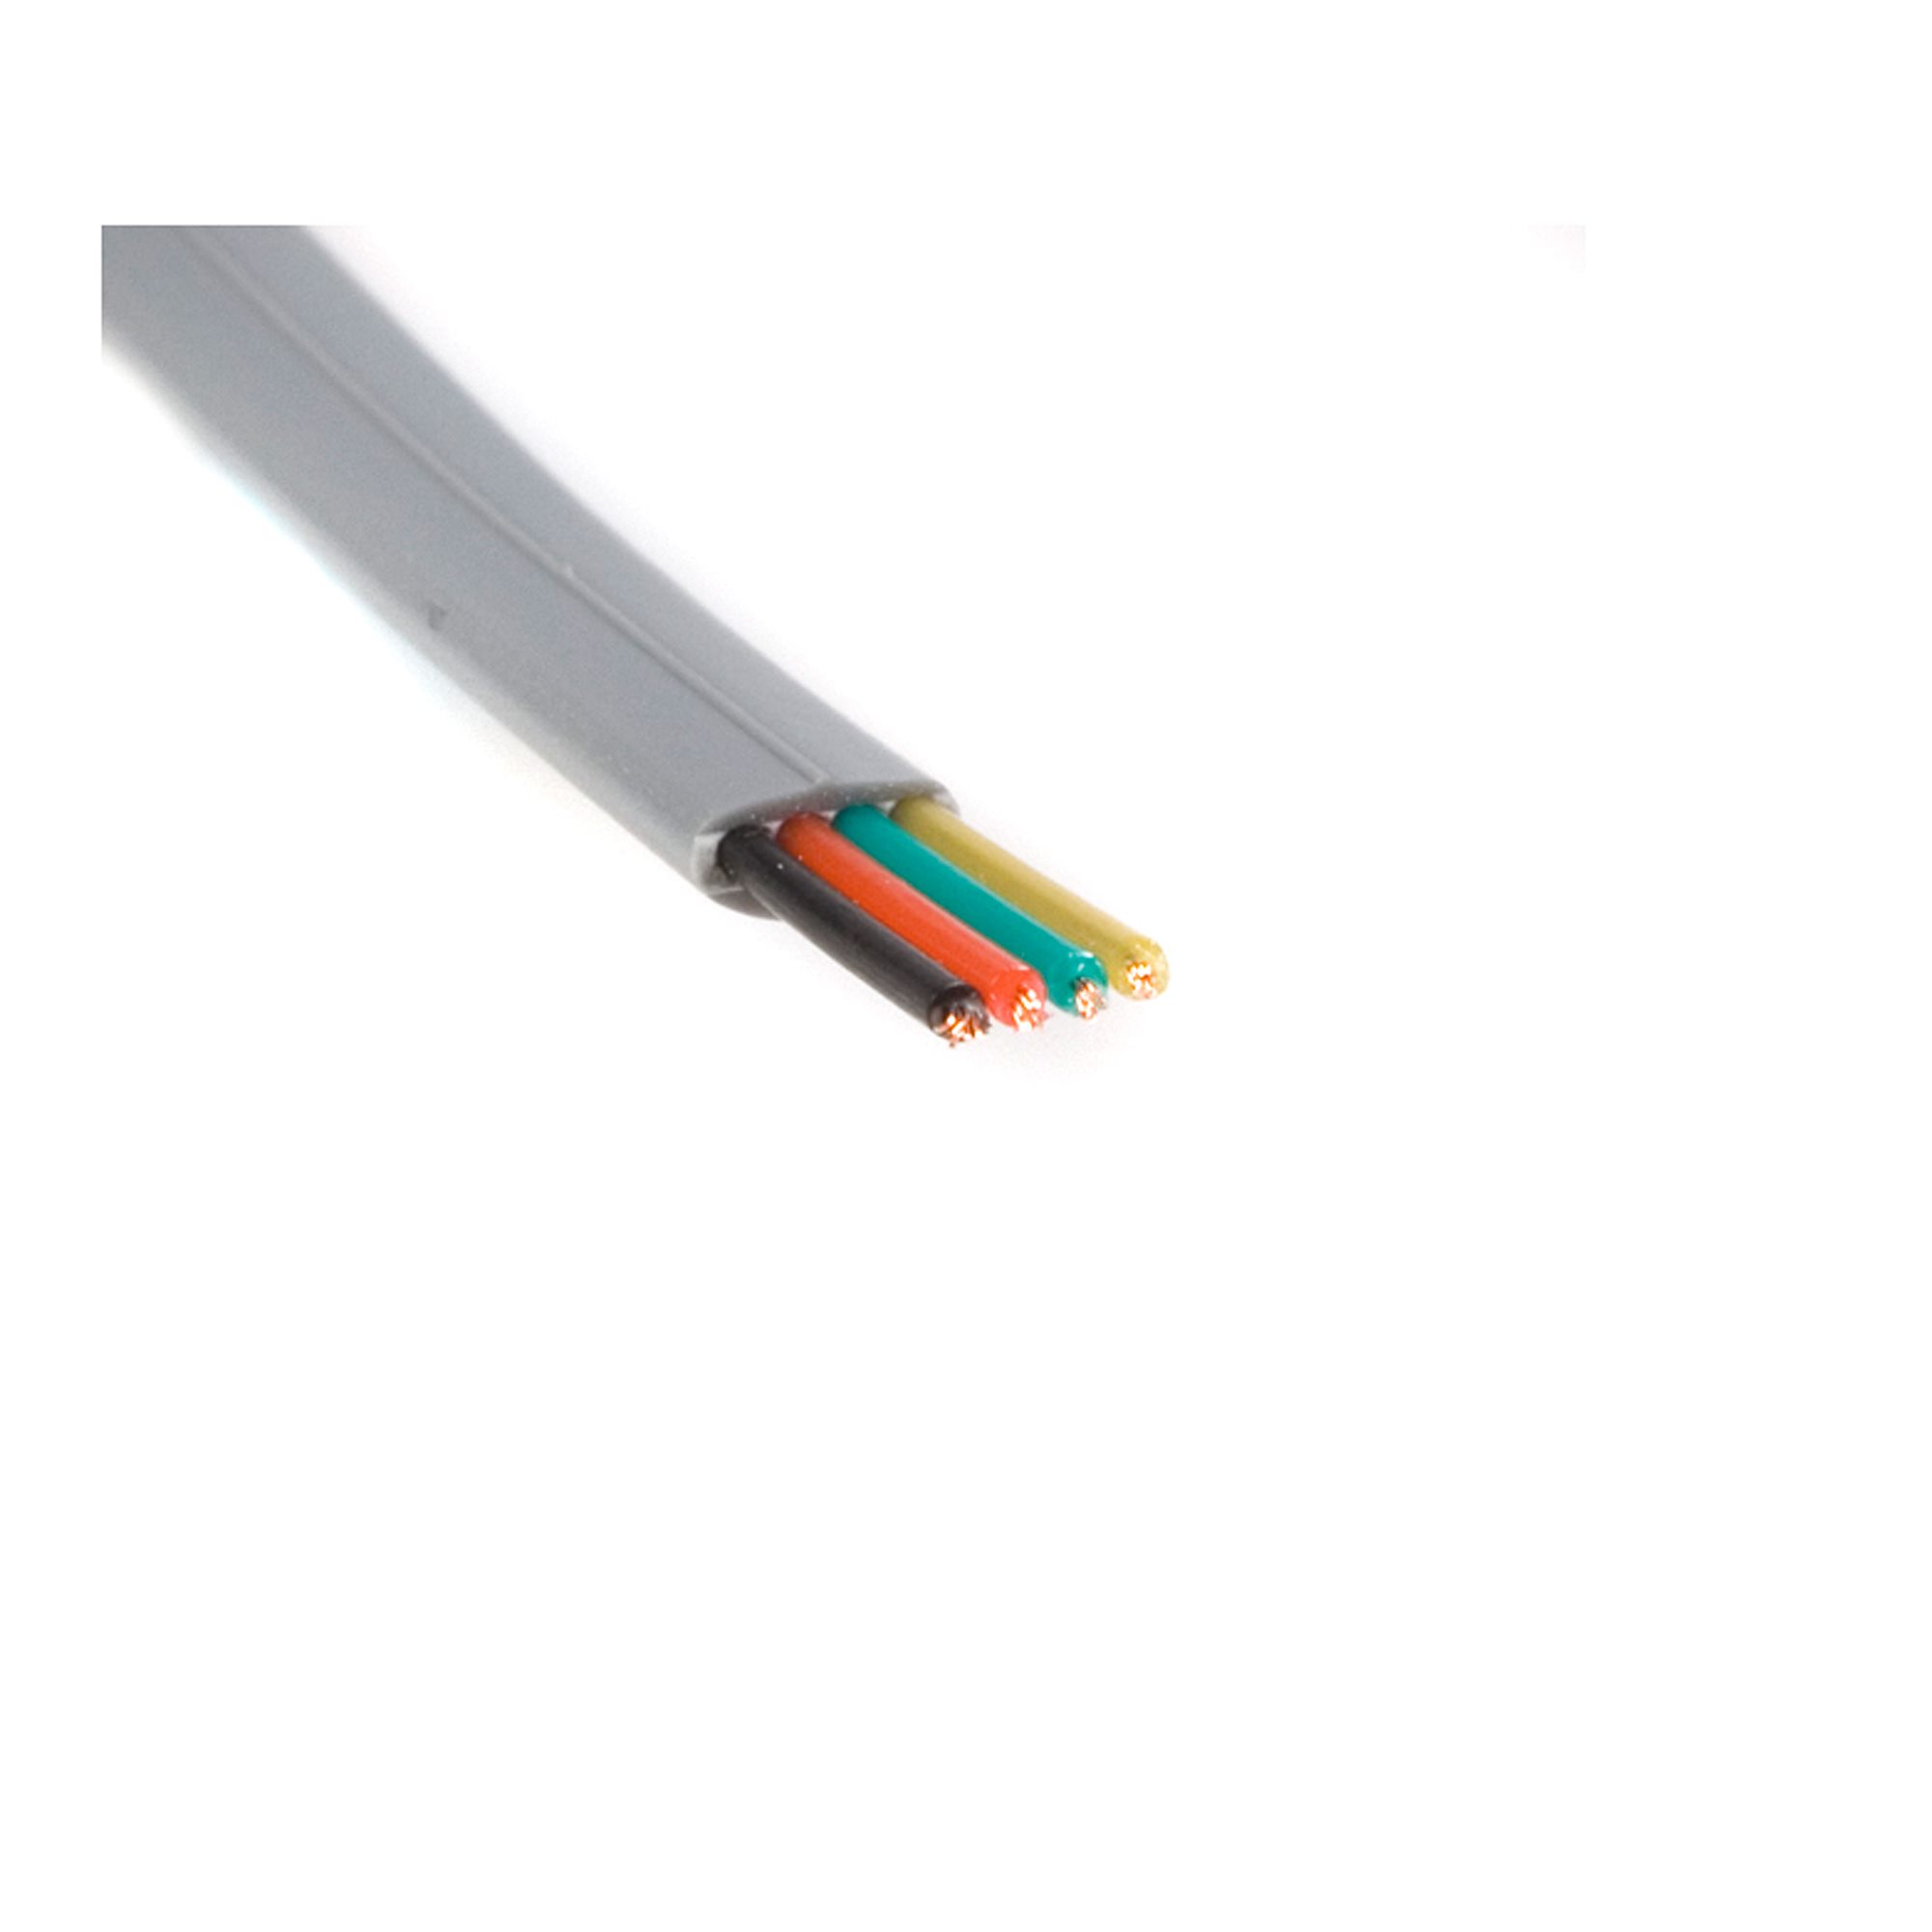 RJ11 4 Conductor Cross Wired Telephone Cable 25 FT